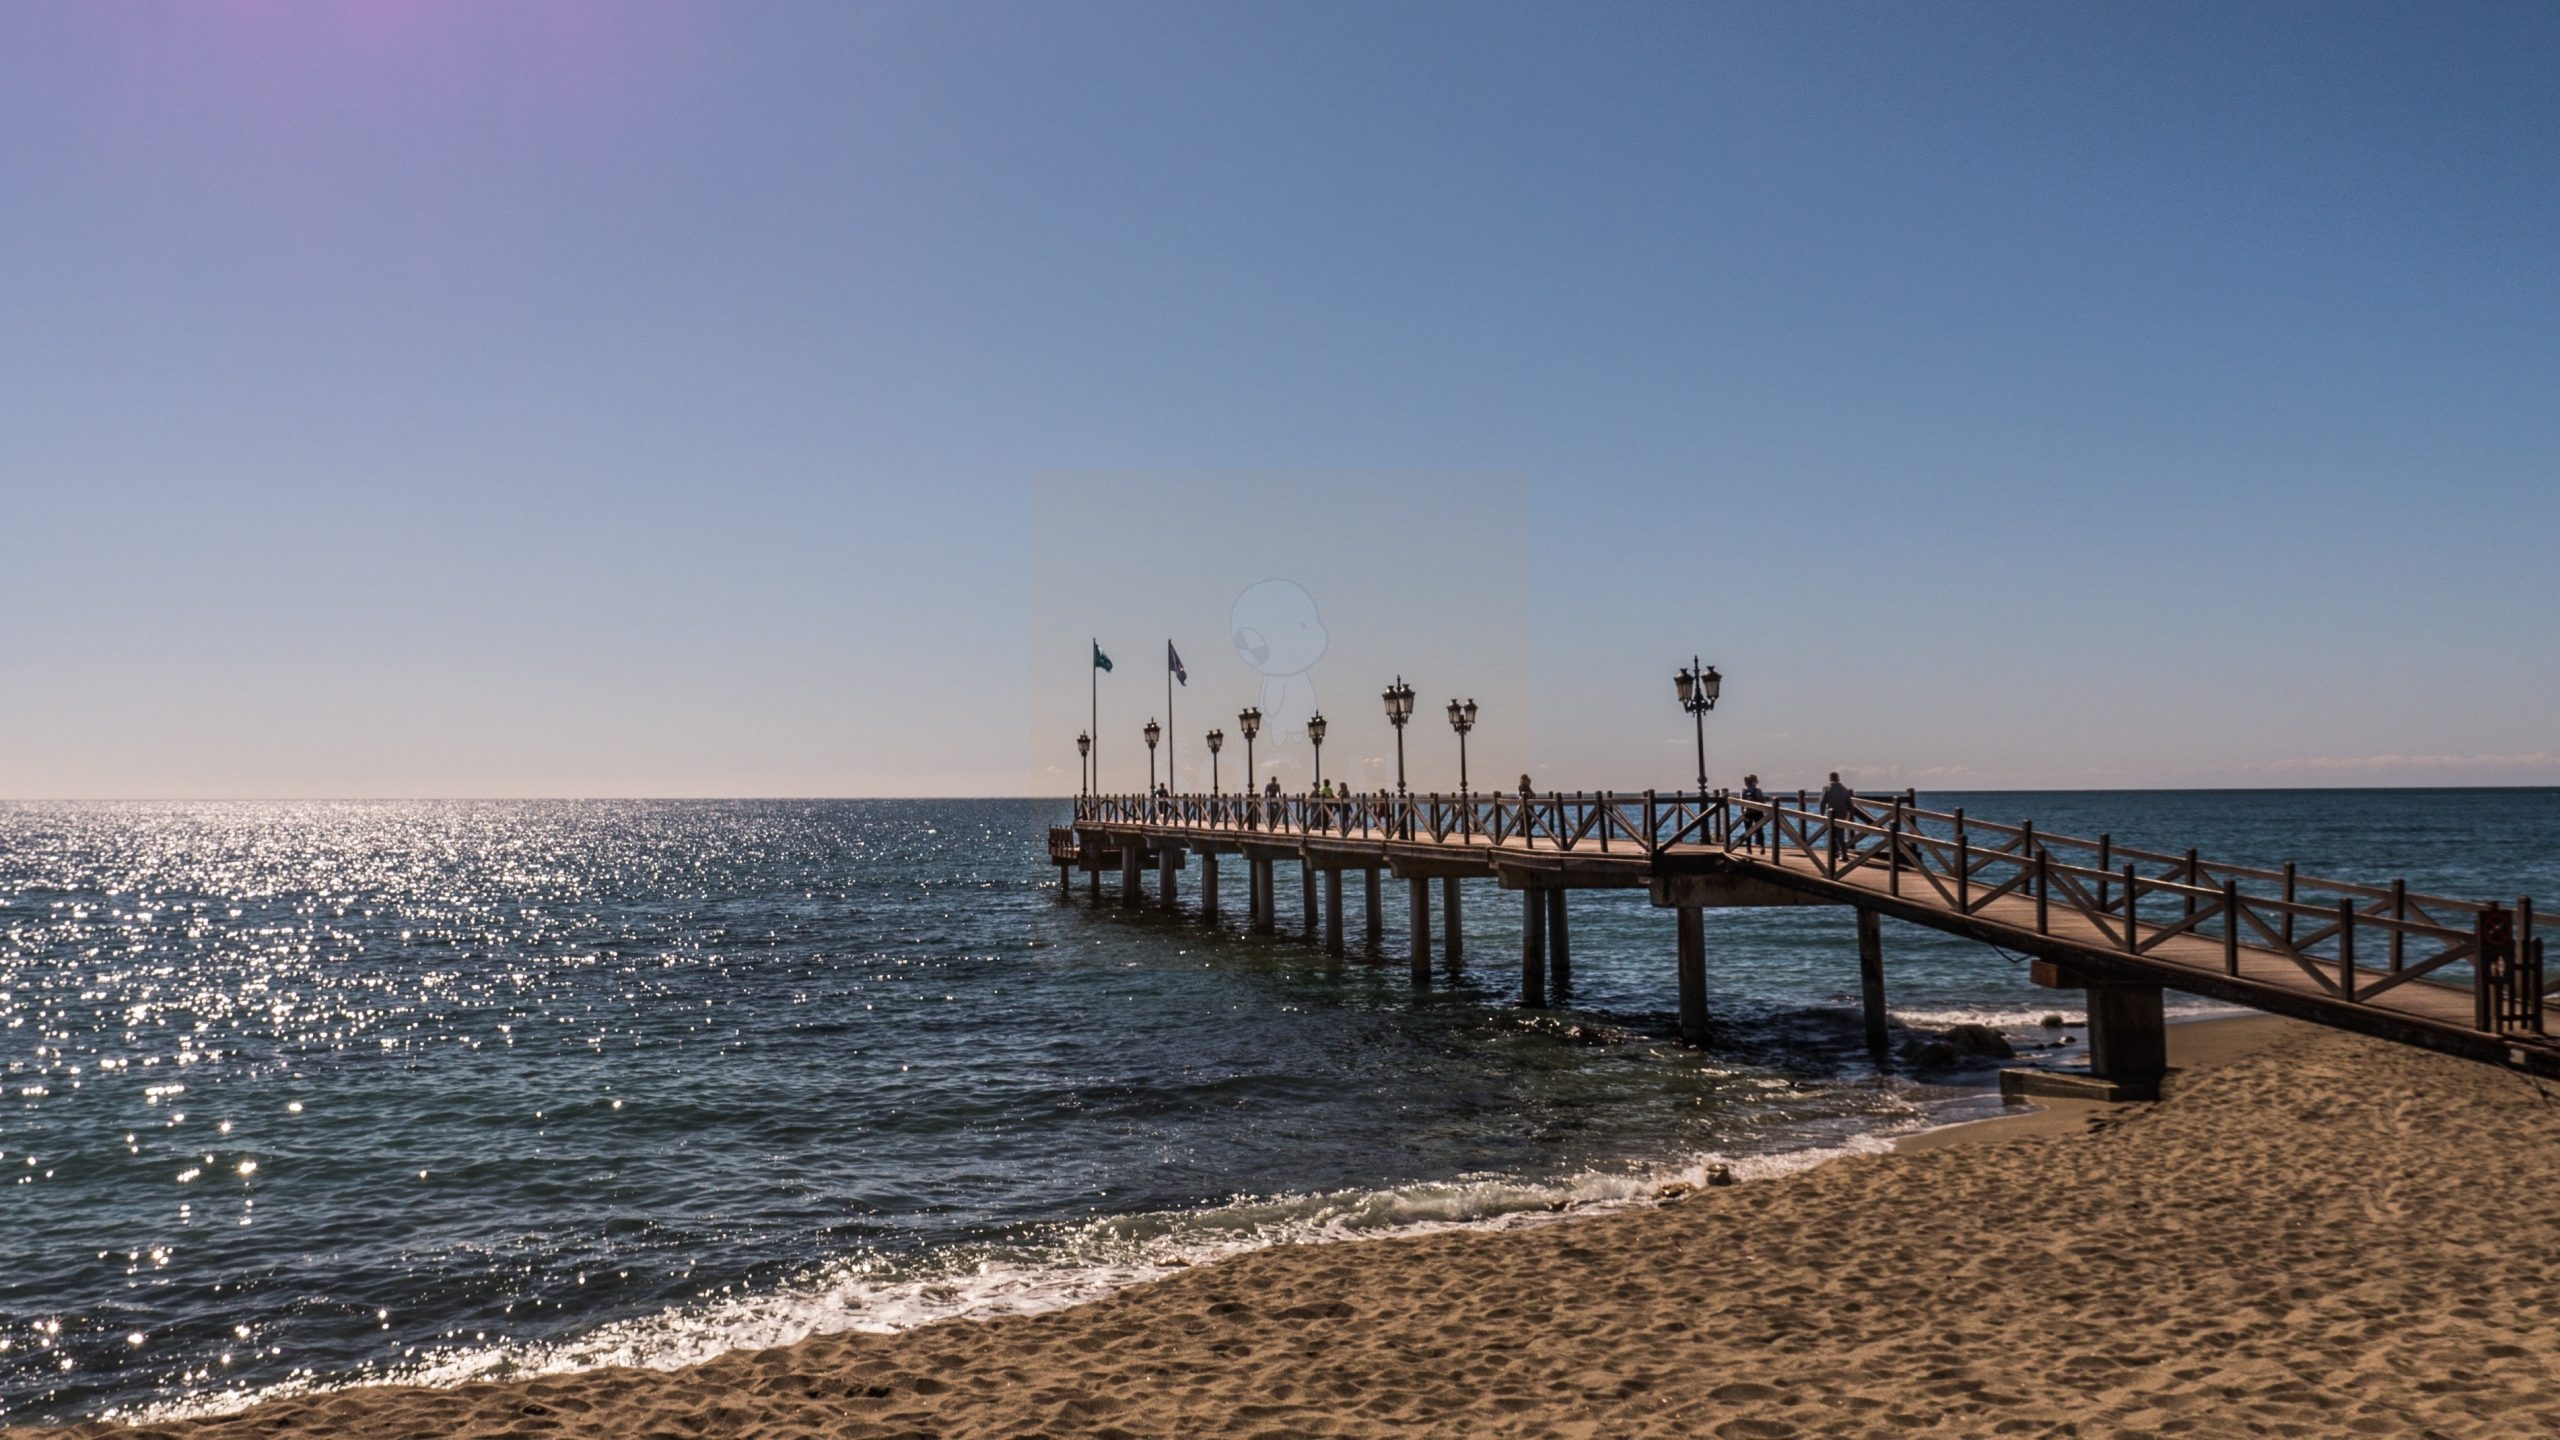 The Costa del Sol: The Most Social Media Friendly Place on the planet? By using social media, you can connect with residents and business owners in your destination city in the Costa del Sol.